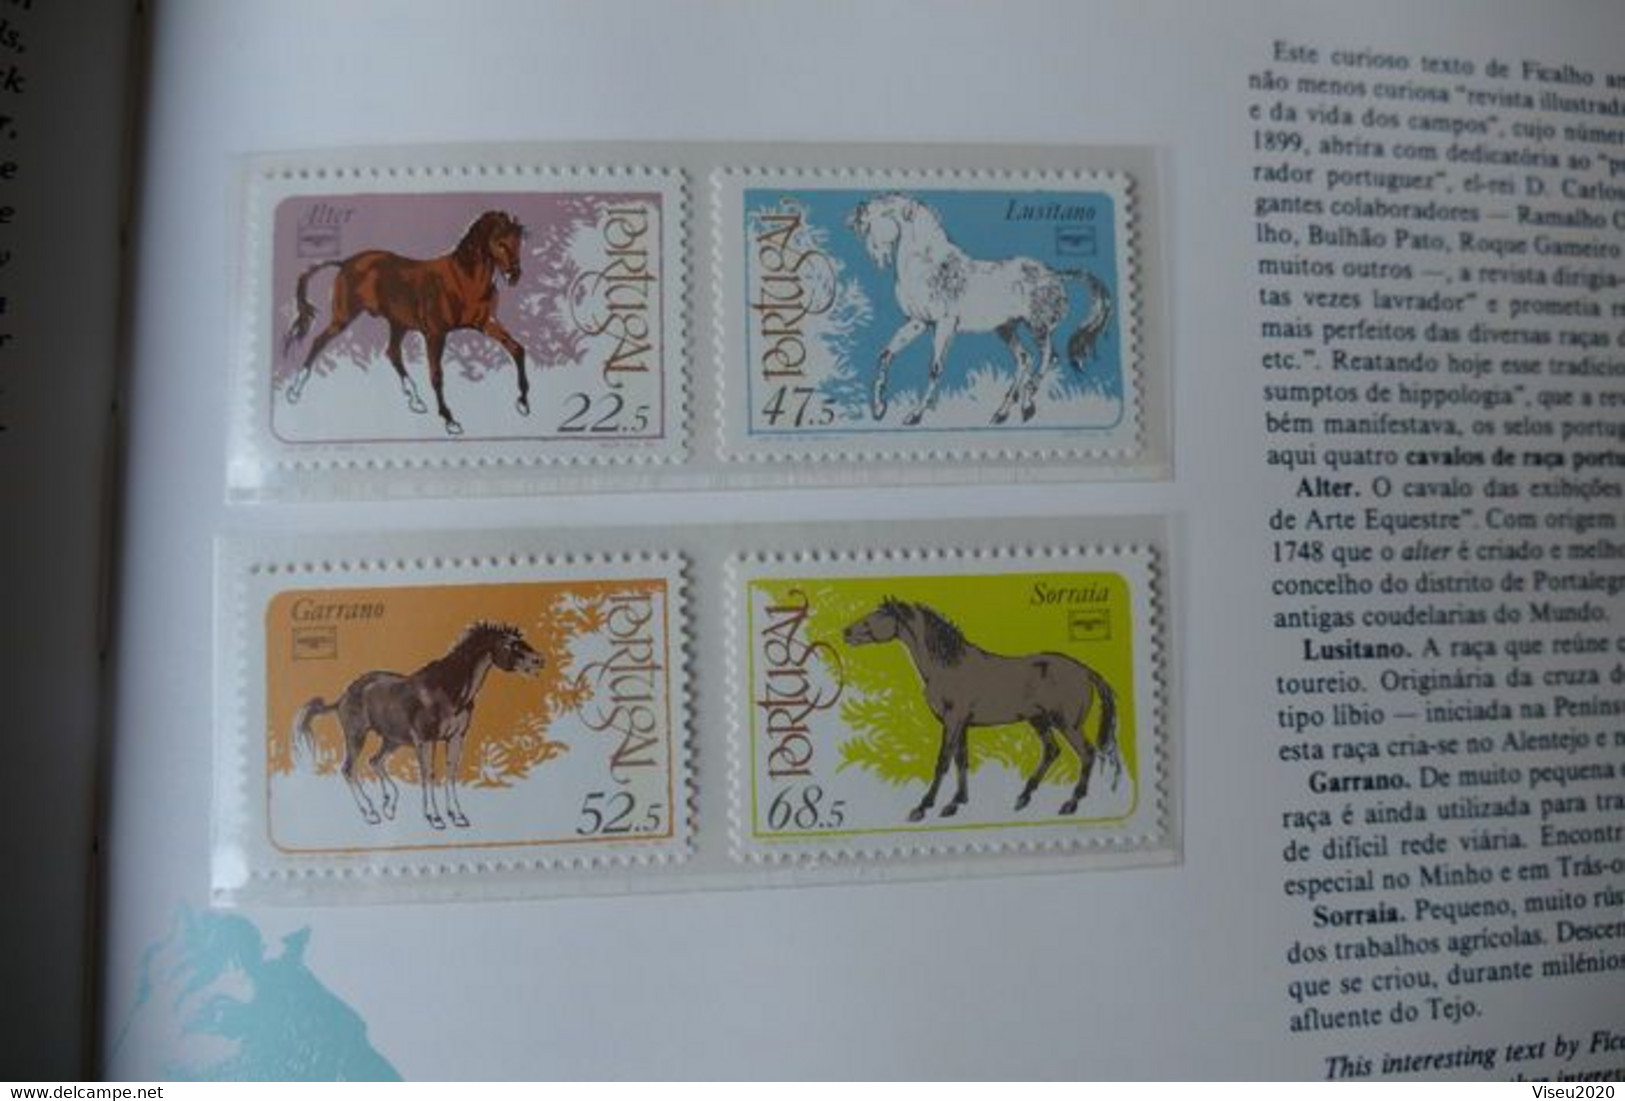 Portugal 1986, Portugal Em Selos - Stamps Of Portugal LIVRO TEMATICO CTT - Book Of The Year